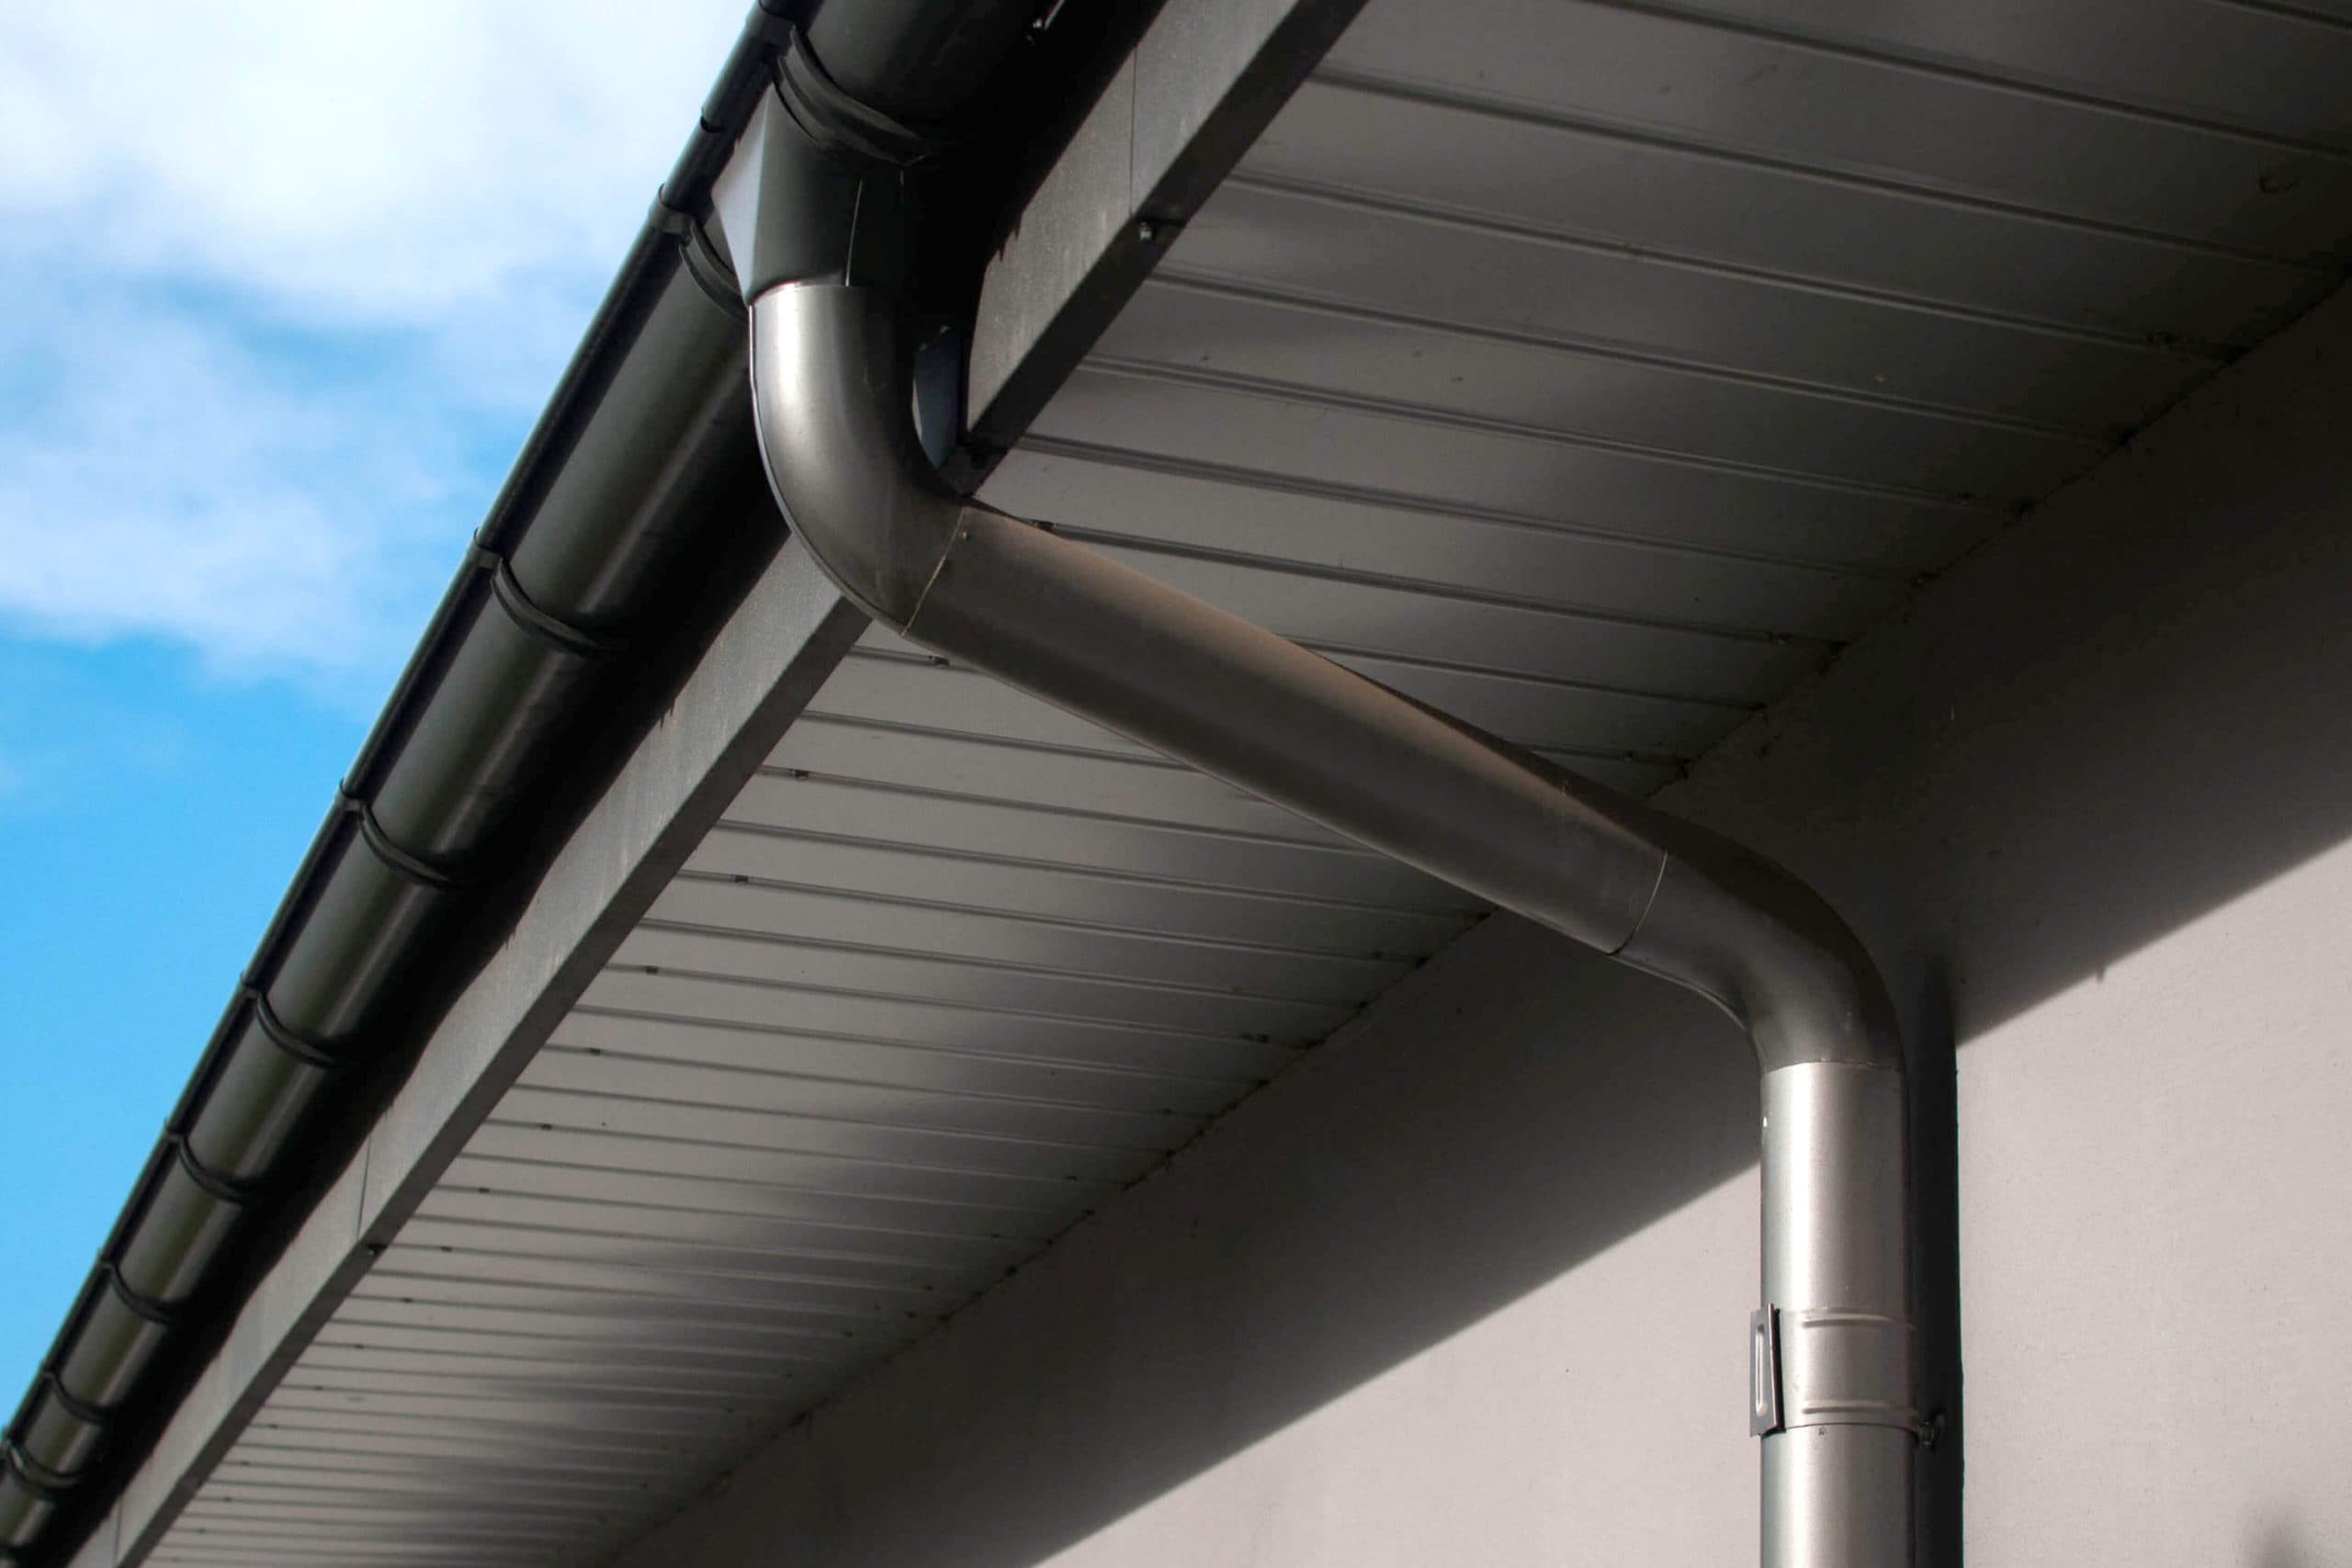 Reliable and affordable Galvanized gutters installation in Overland Park